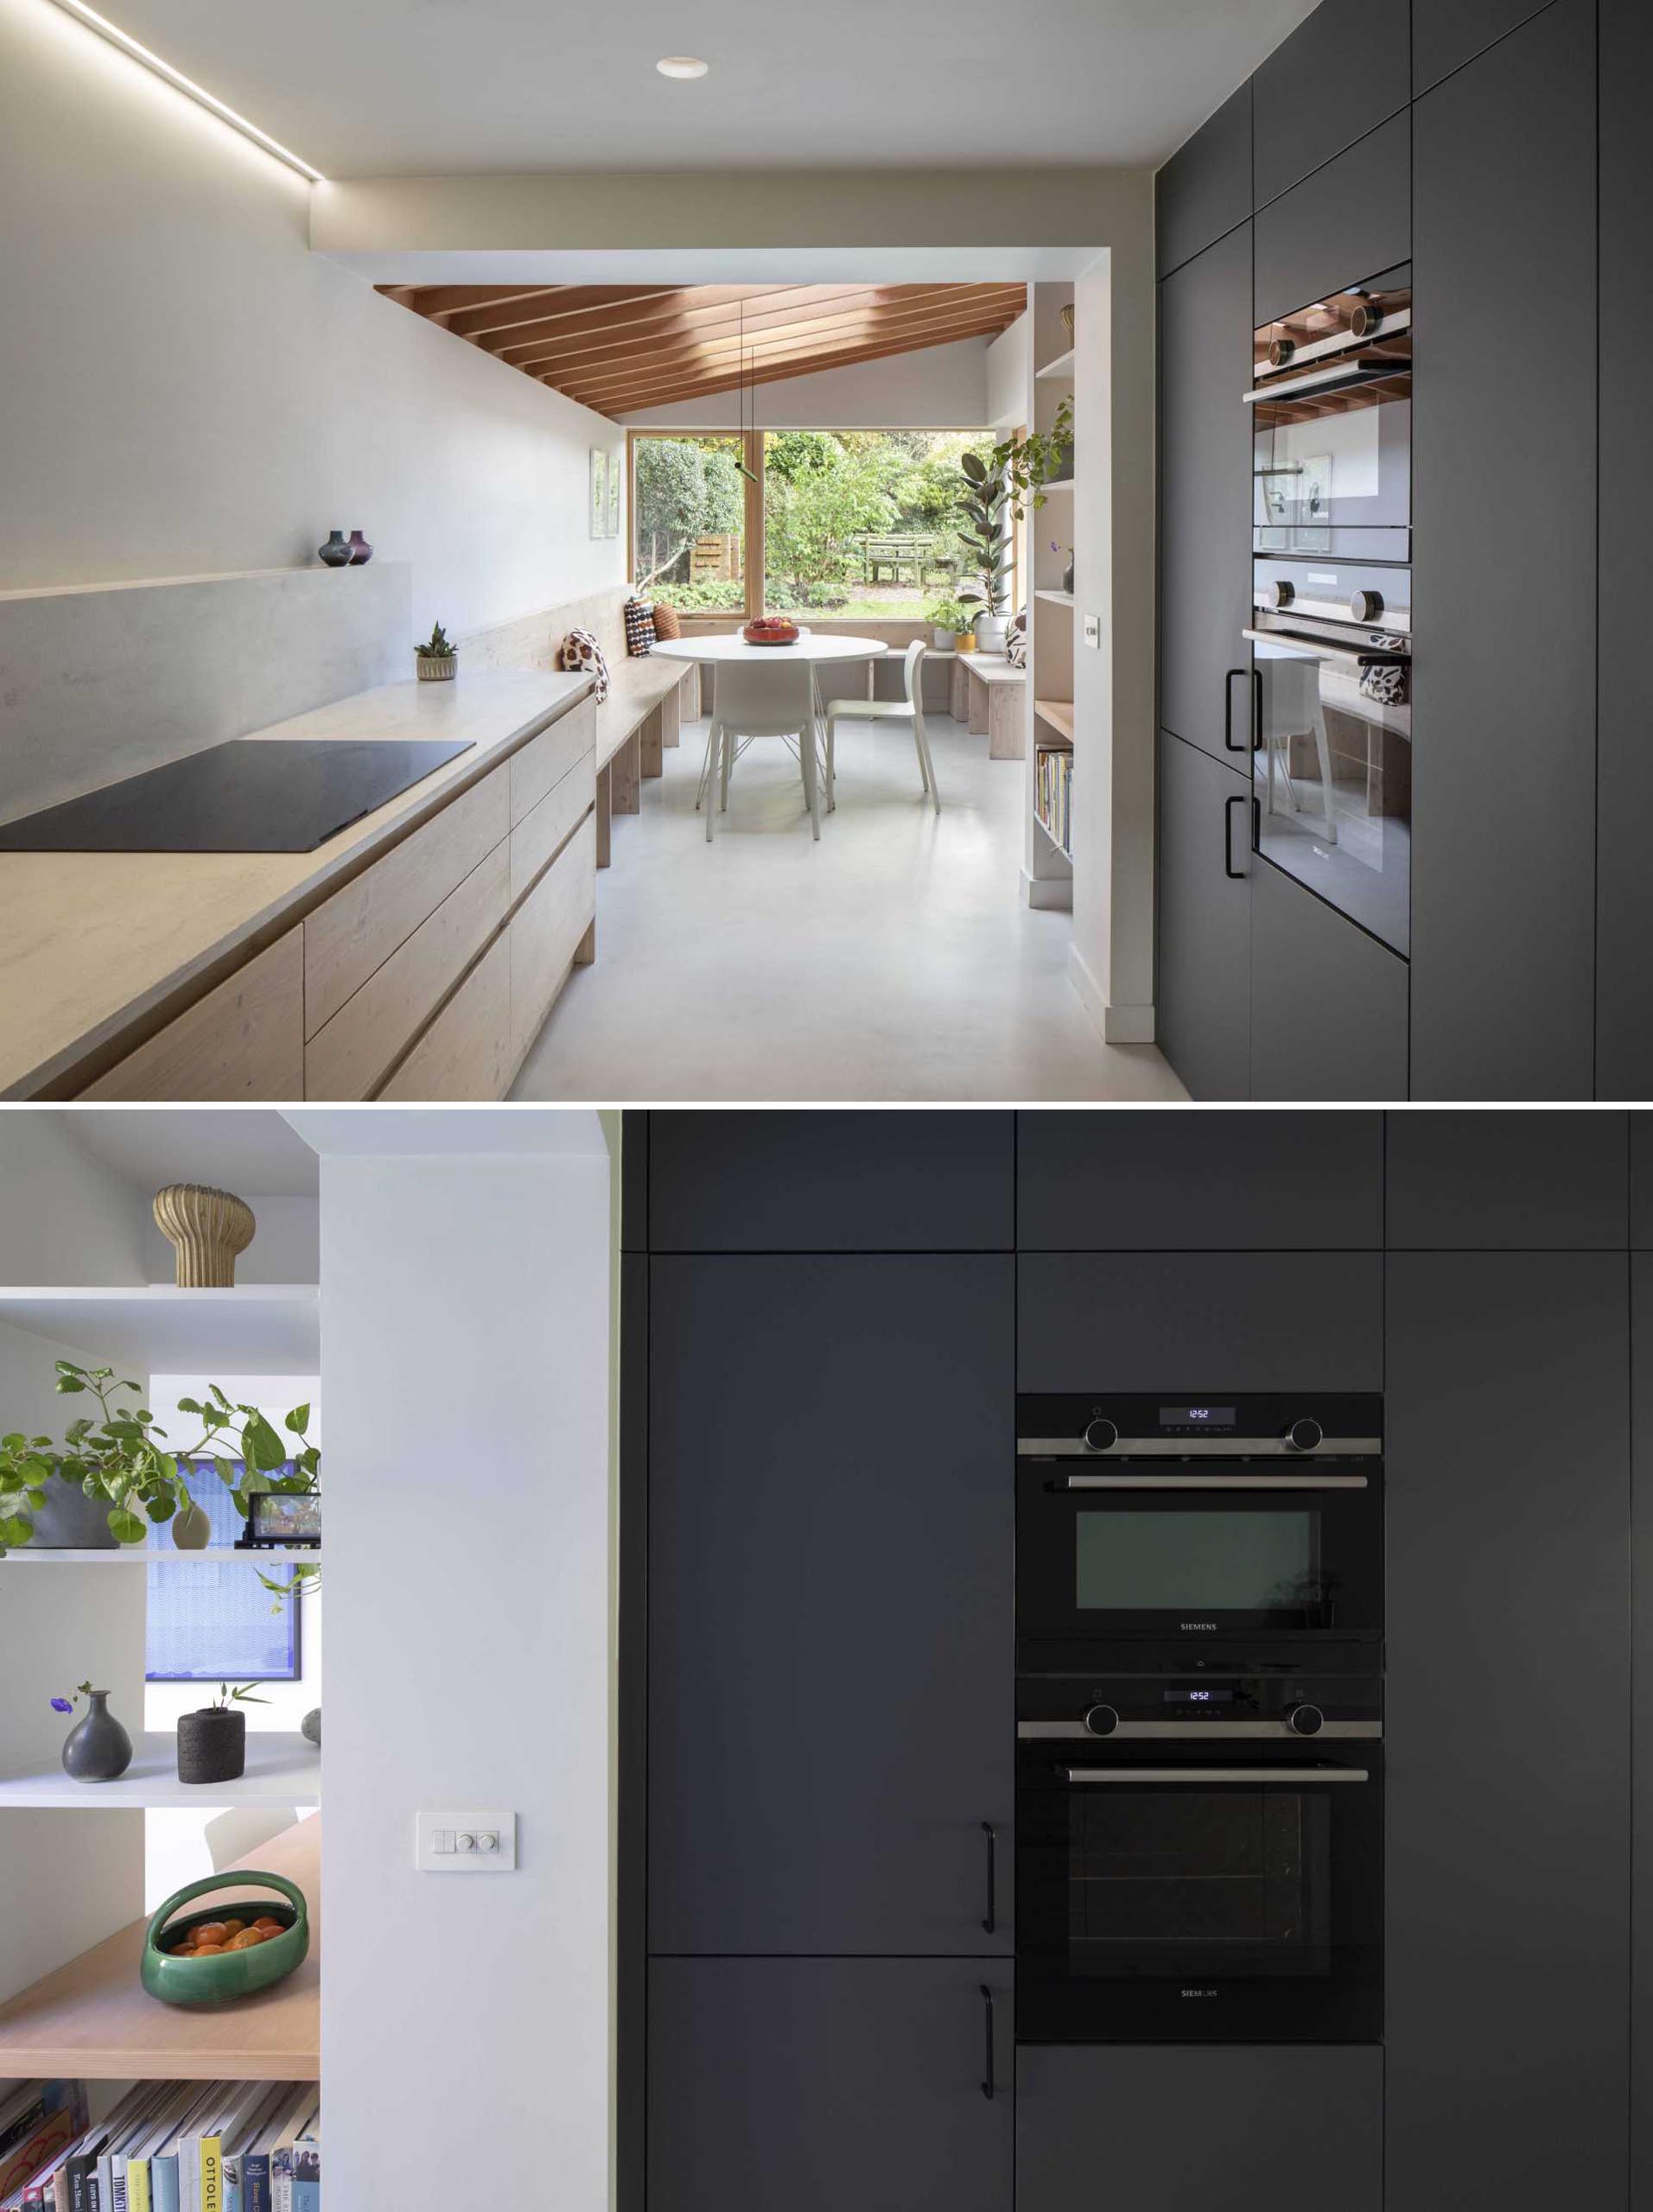 A modern galley kitchen with matte black and wood cabinets.